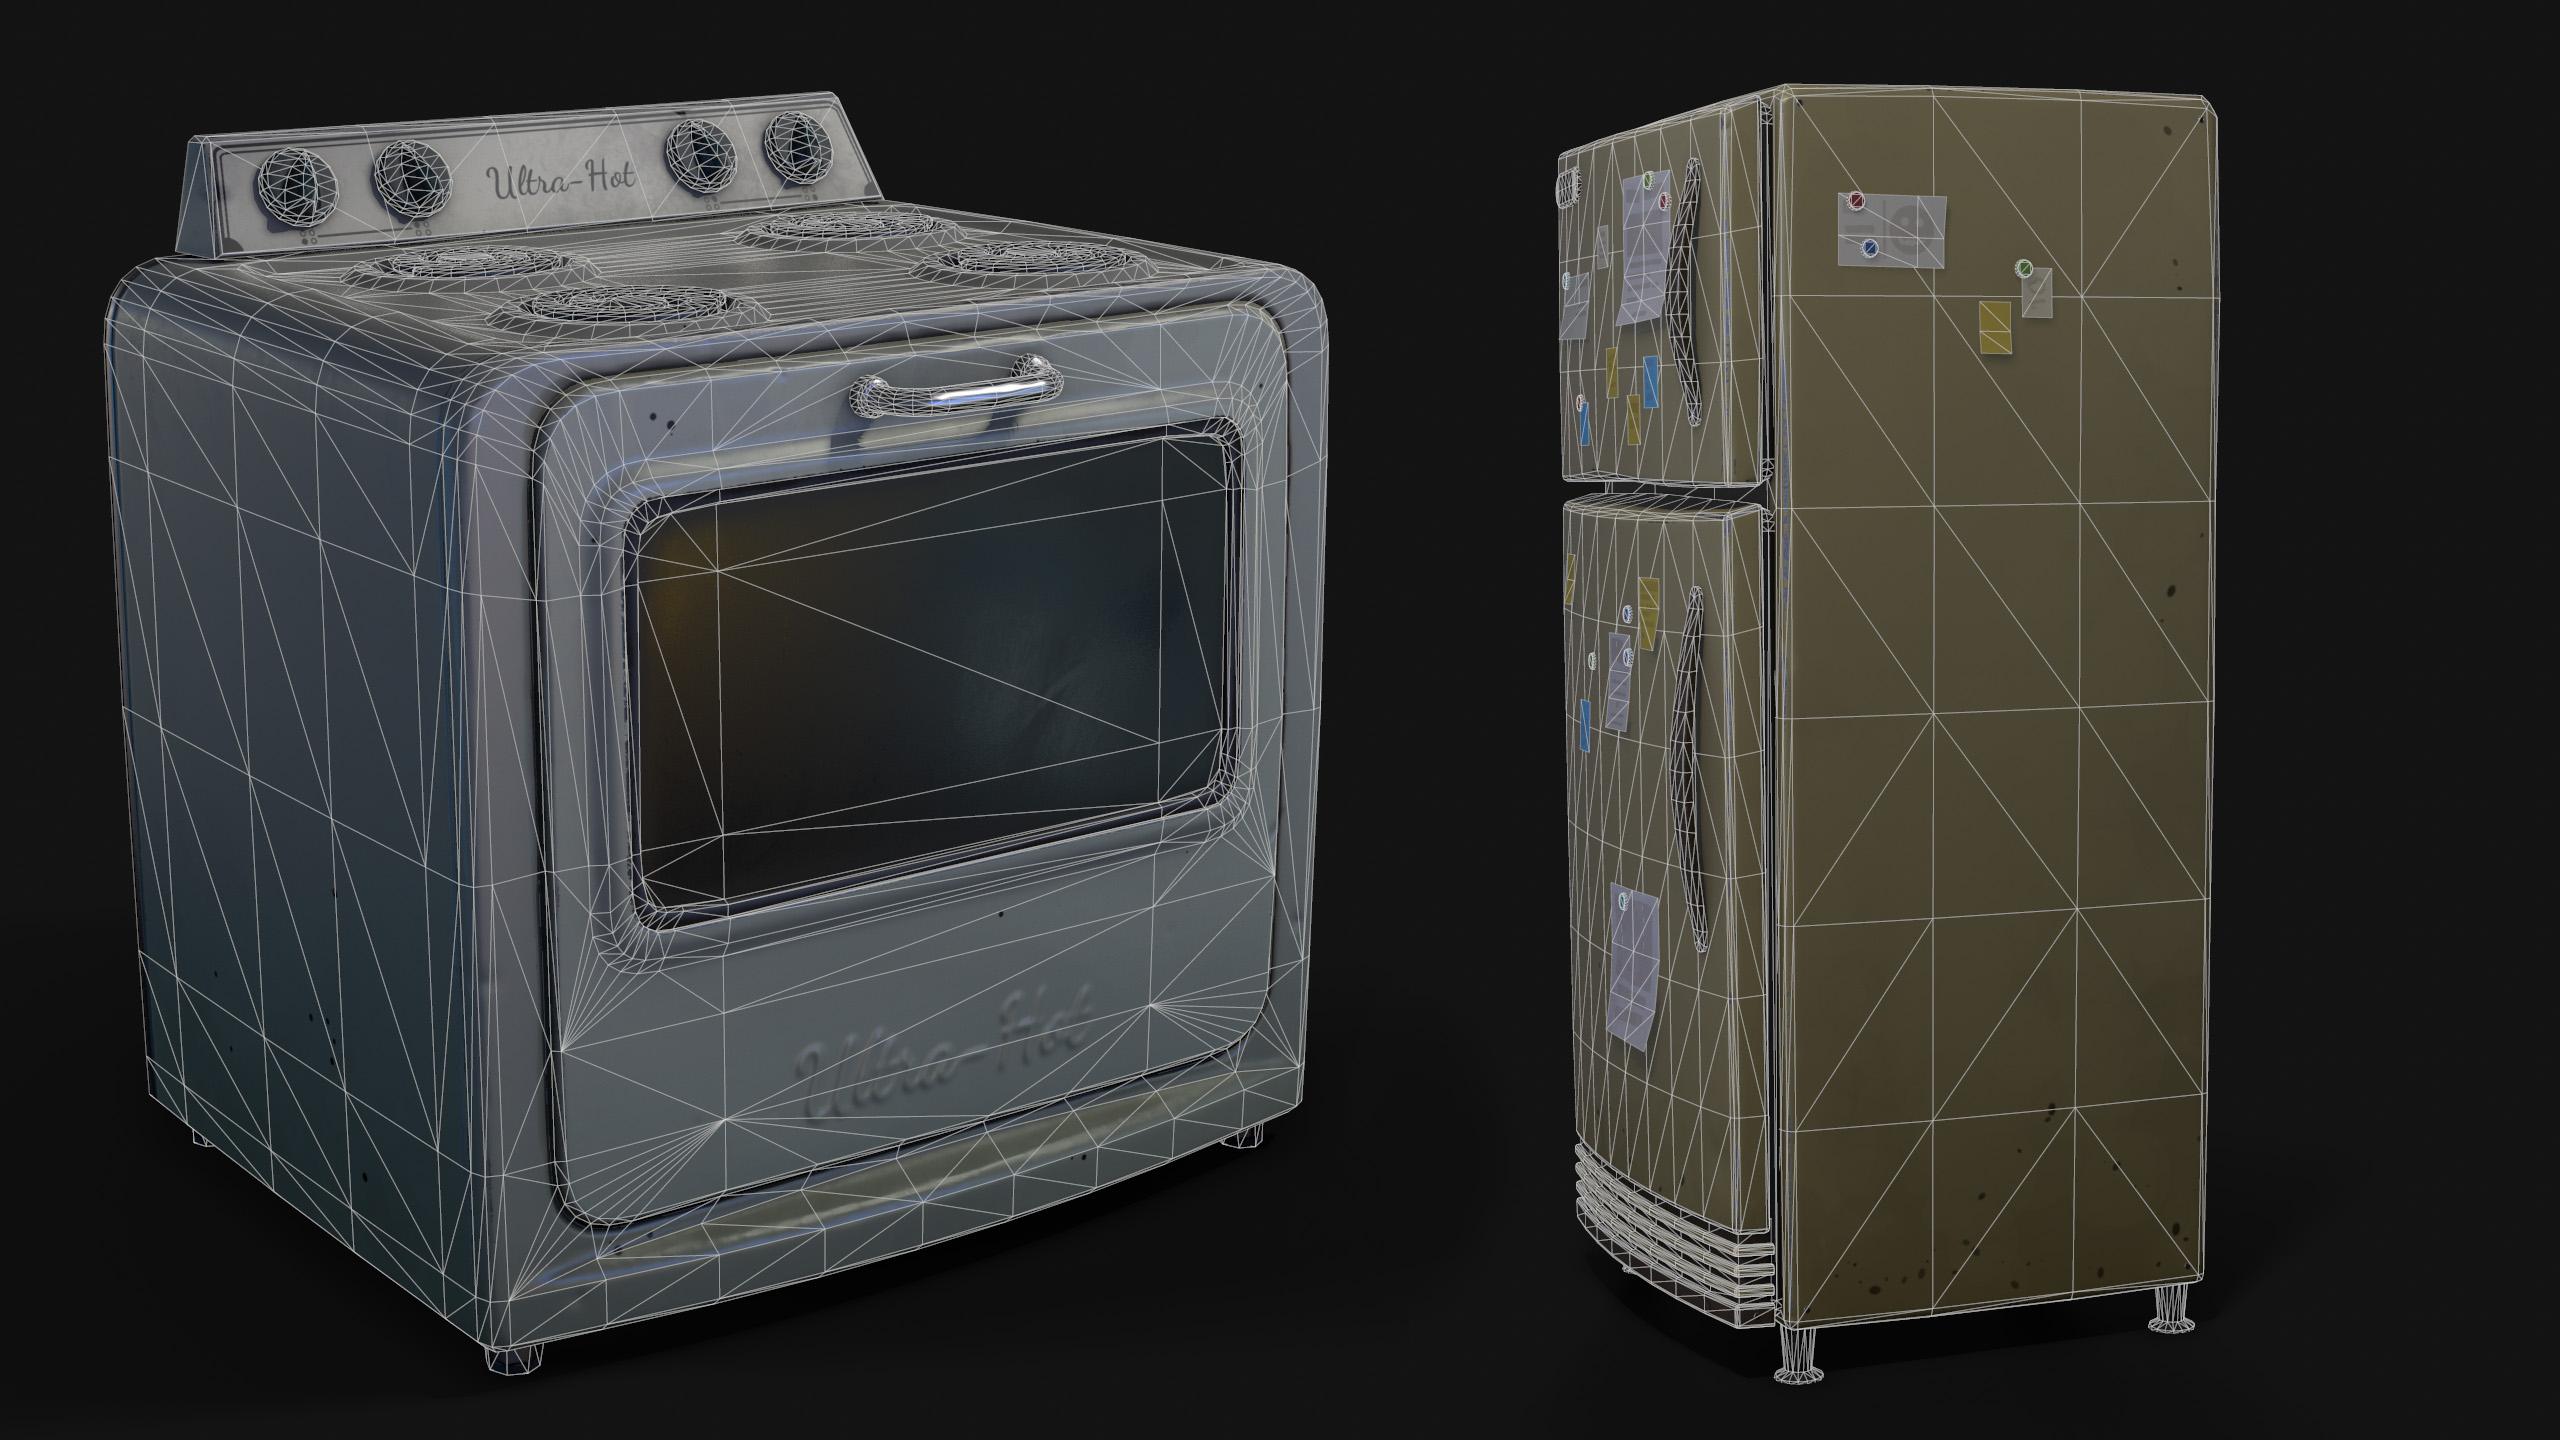 A wireframe render of a stylized oven and fridge